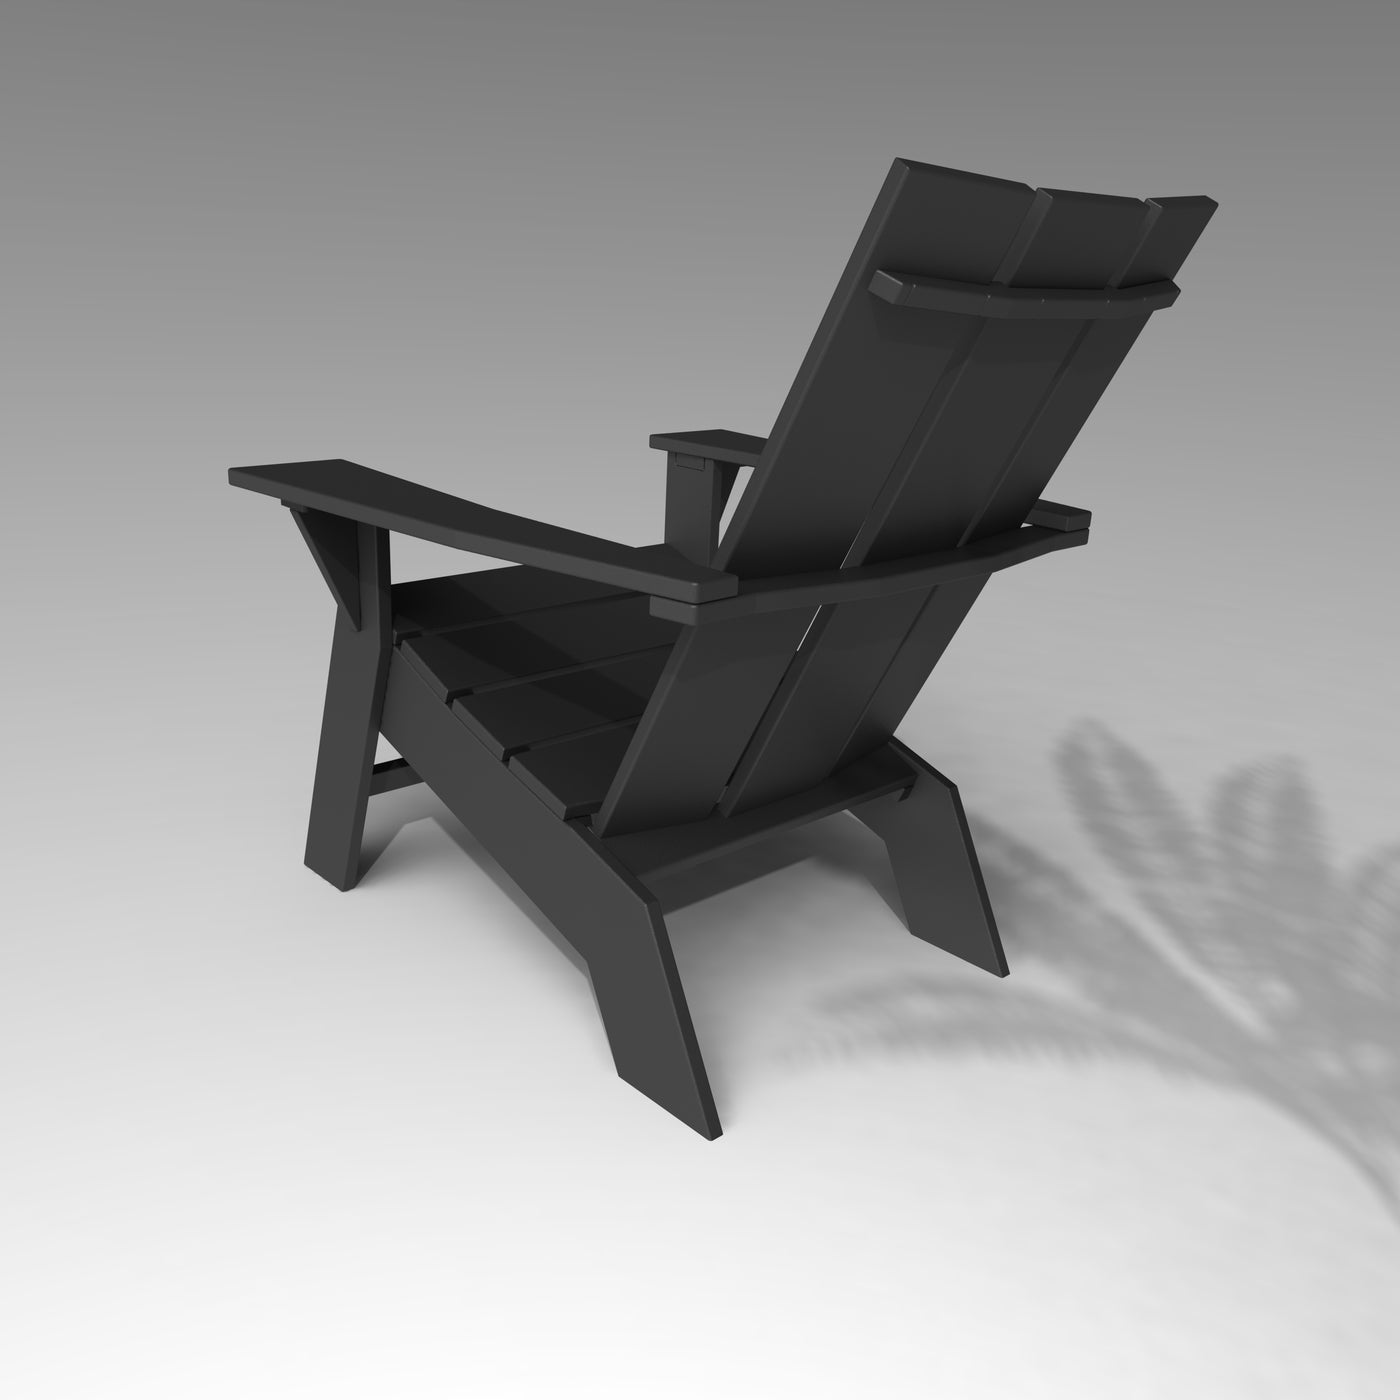 Tranquil Chair